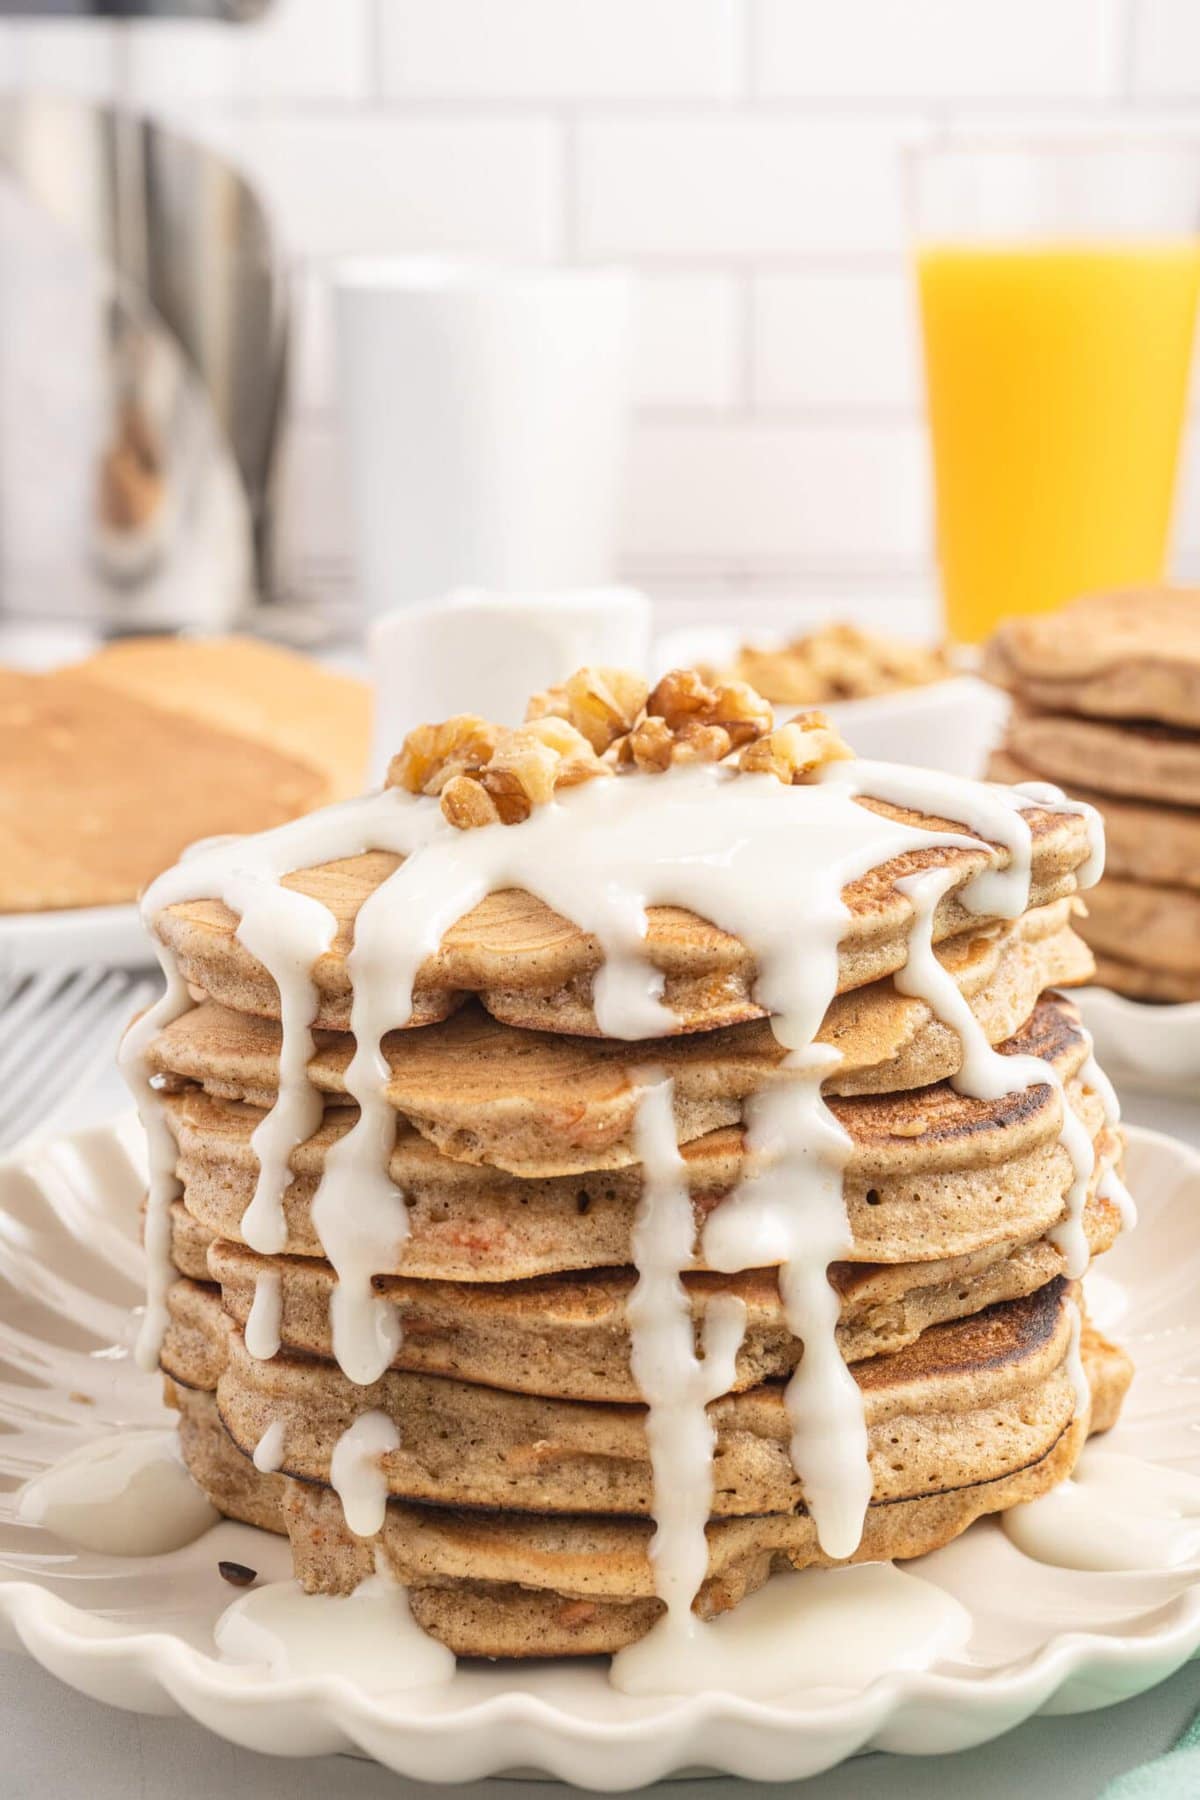 A stacked pile of Carrot Cake Pancakes.